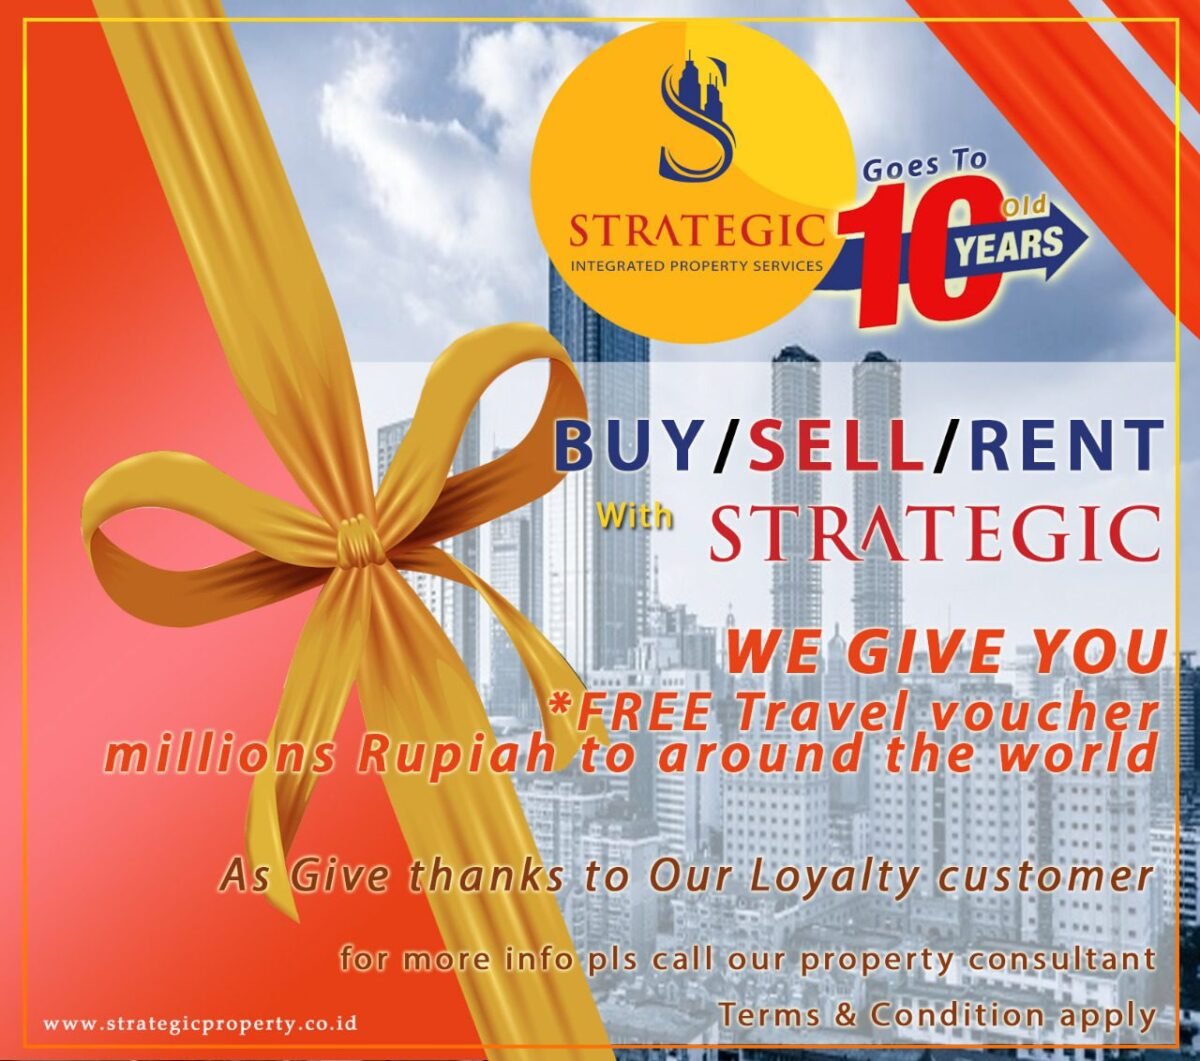 Strategic Property Goes 10 Years Giving You Free Voucher